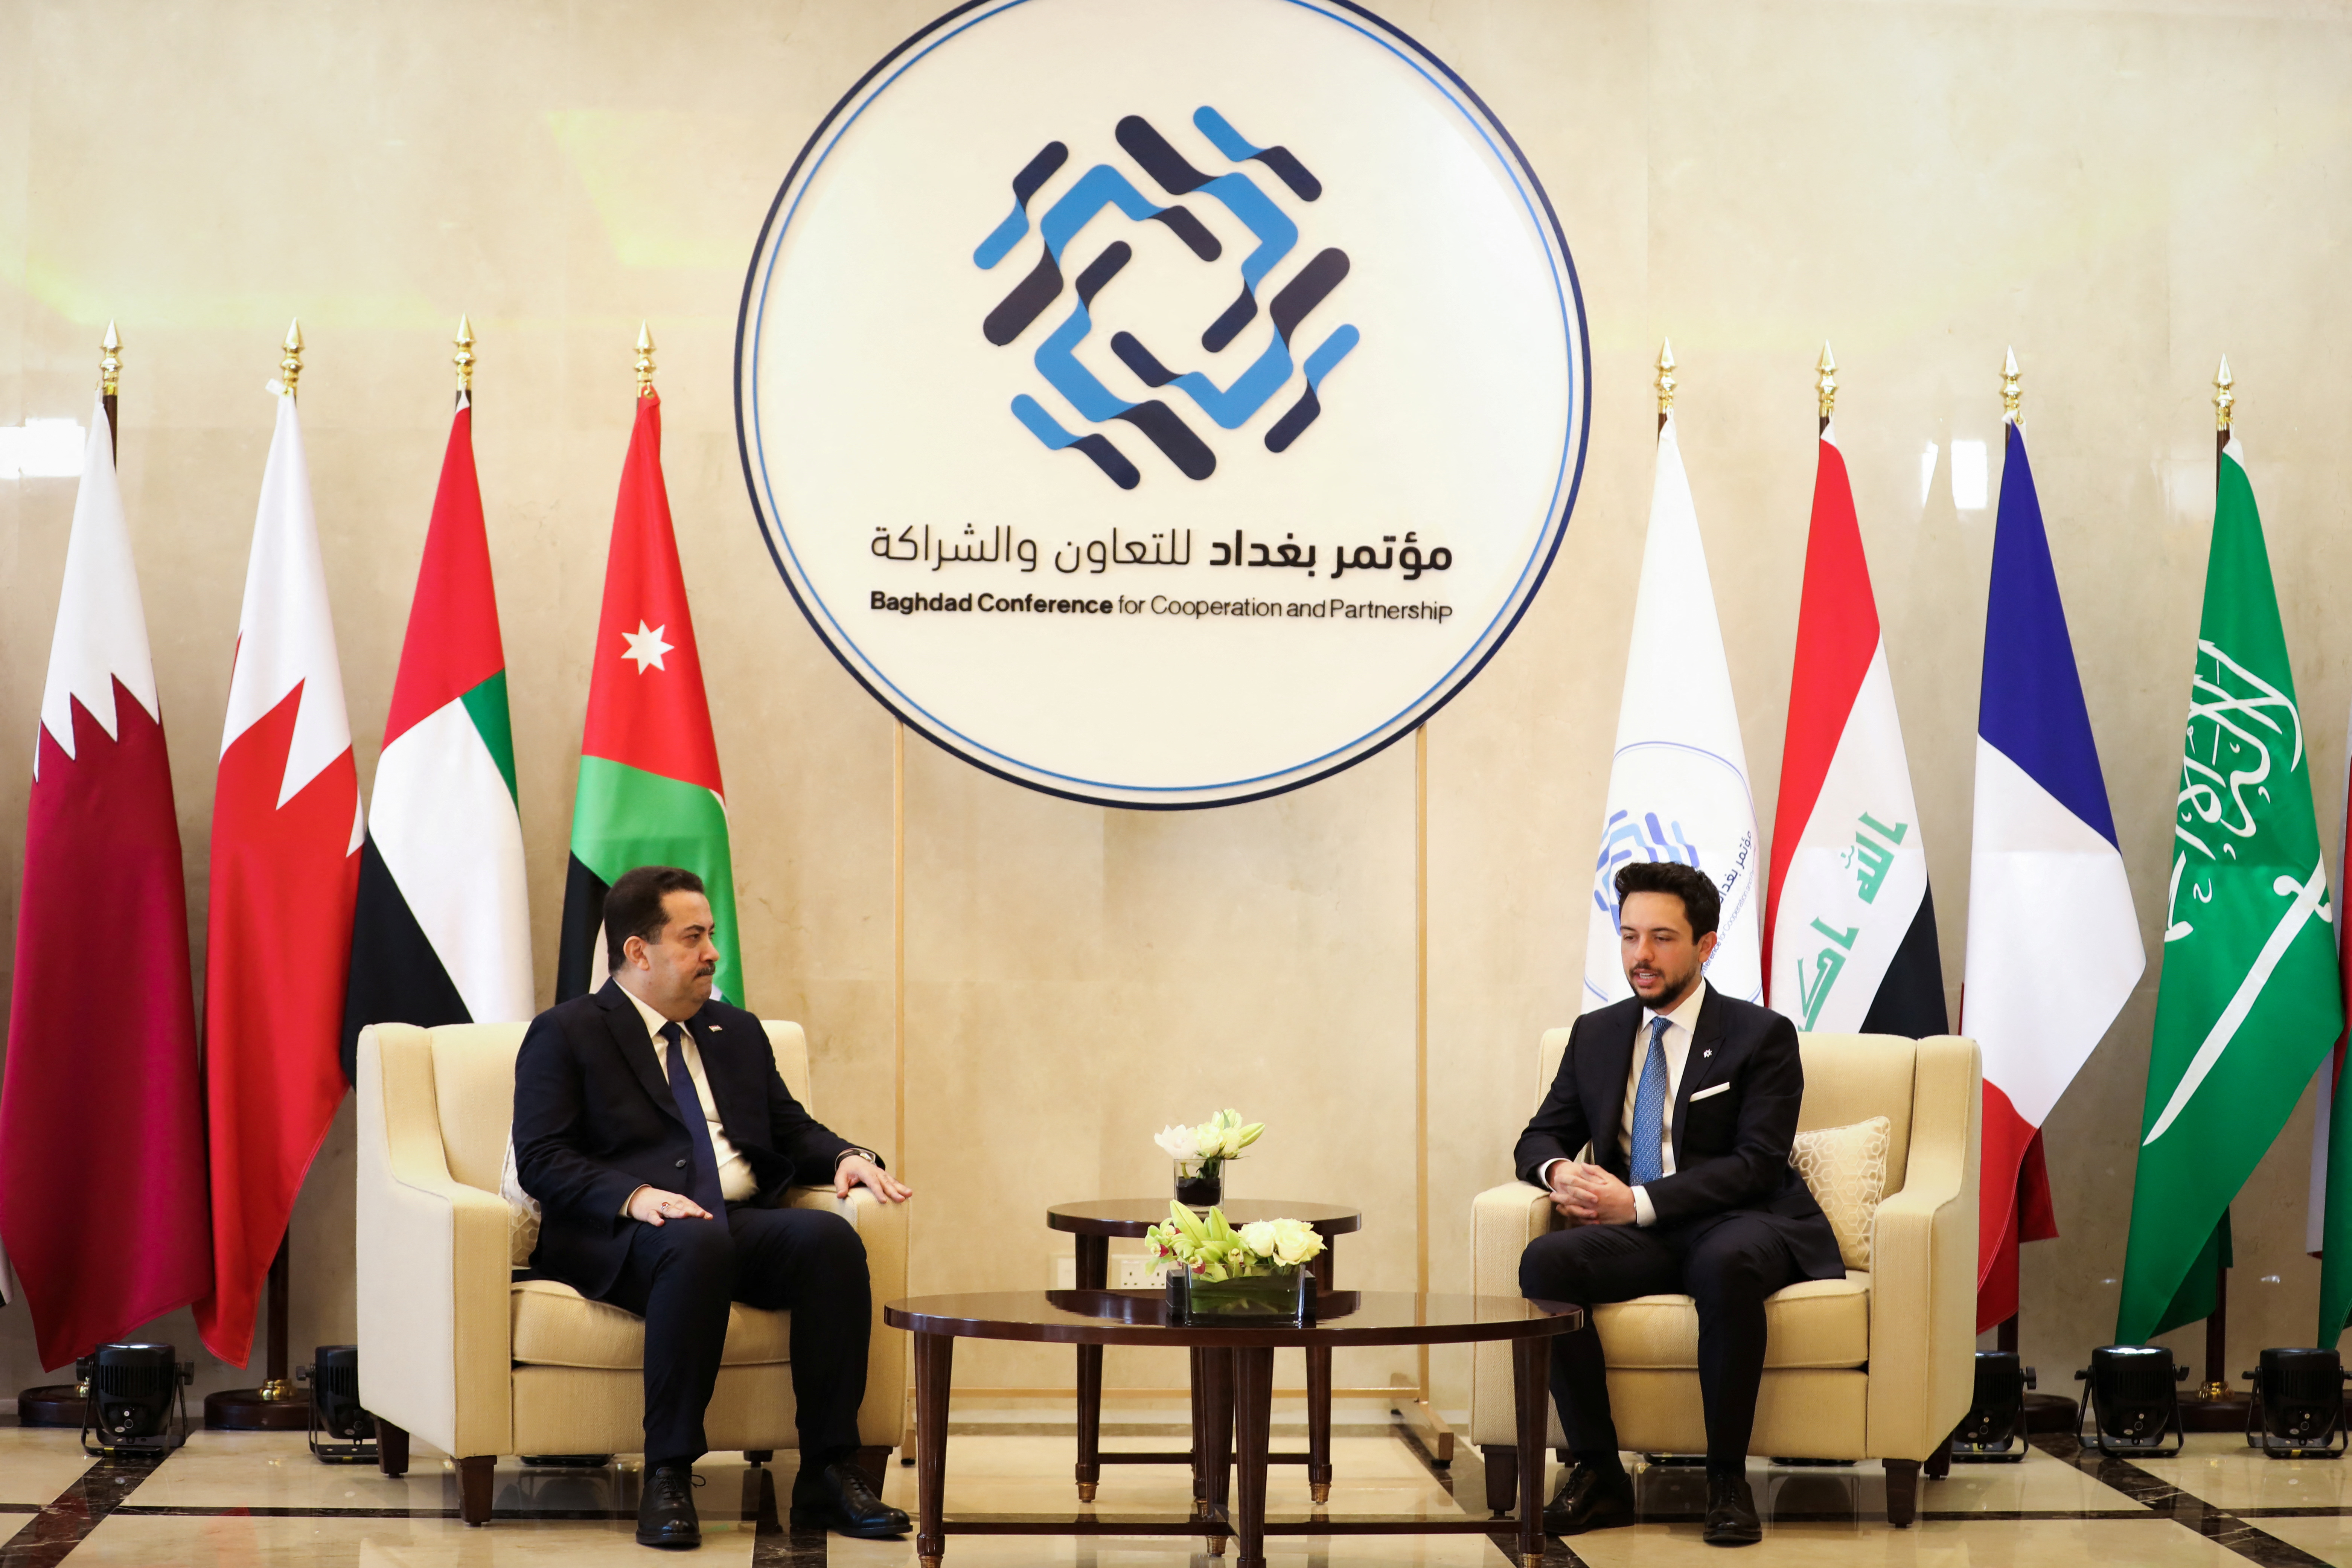 Jordan's Crown Prince Hussein meets with Iraqi Prime Minister Mohammed Shia al-Sudani upon his arrival at Queen Alia International Airport in Amman